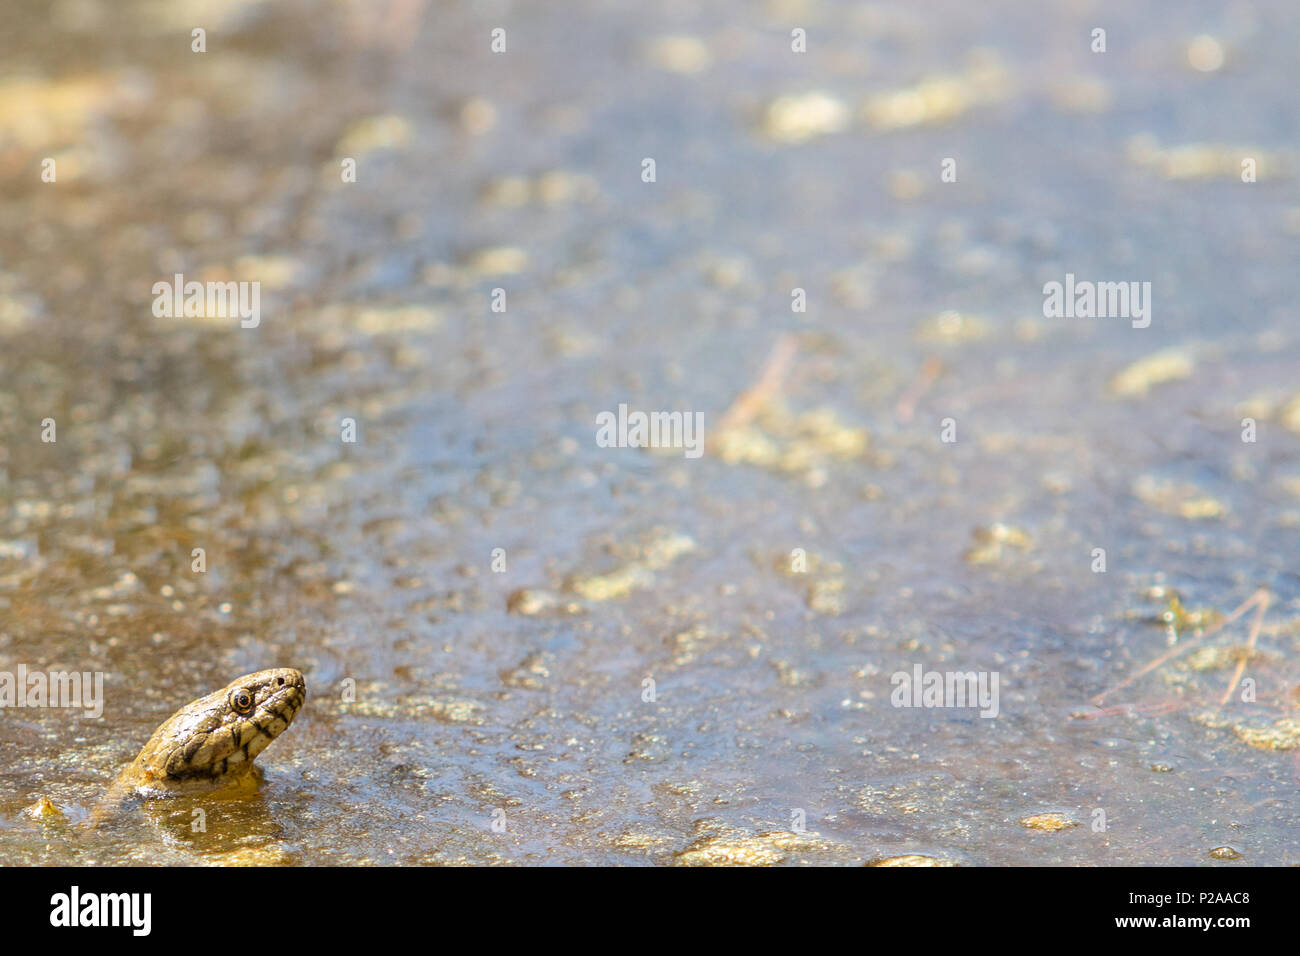 https://c8.alamy.com/comp/P2AAC8/water-snake-in-a-pond-in-catalonia-spain-P2AAC8.jpg